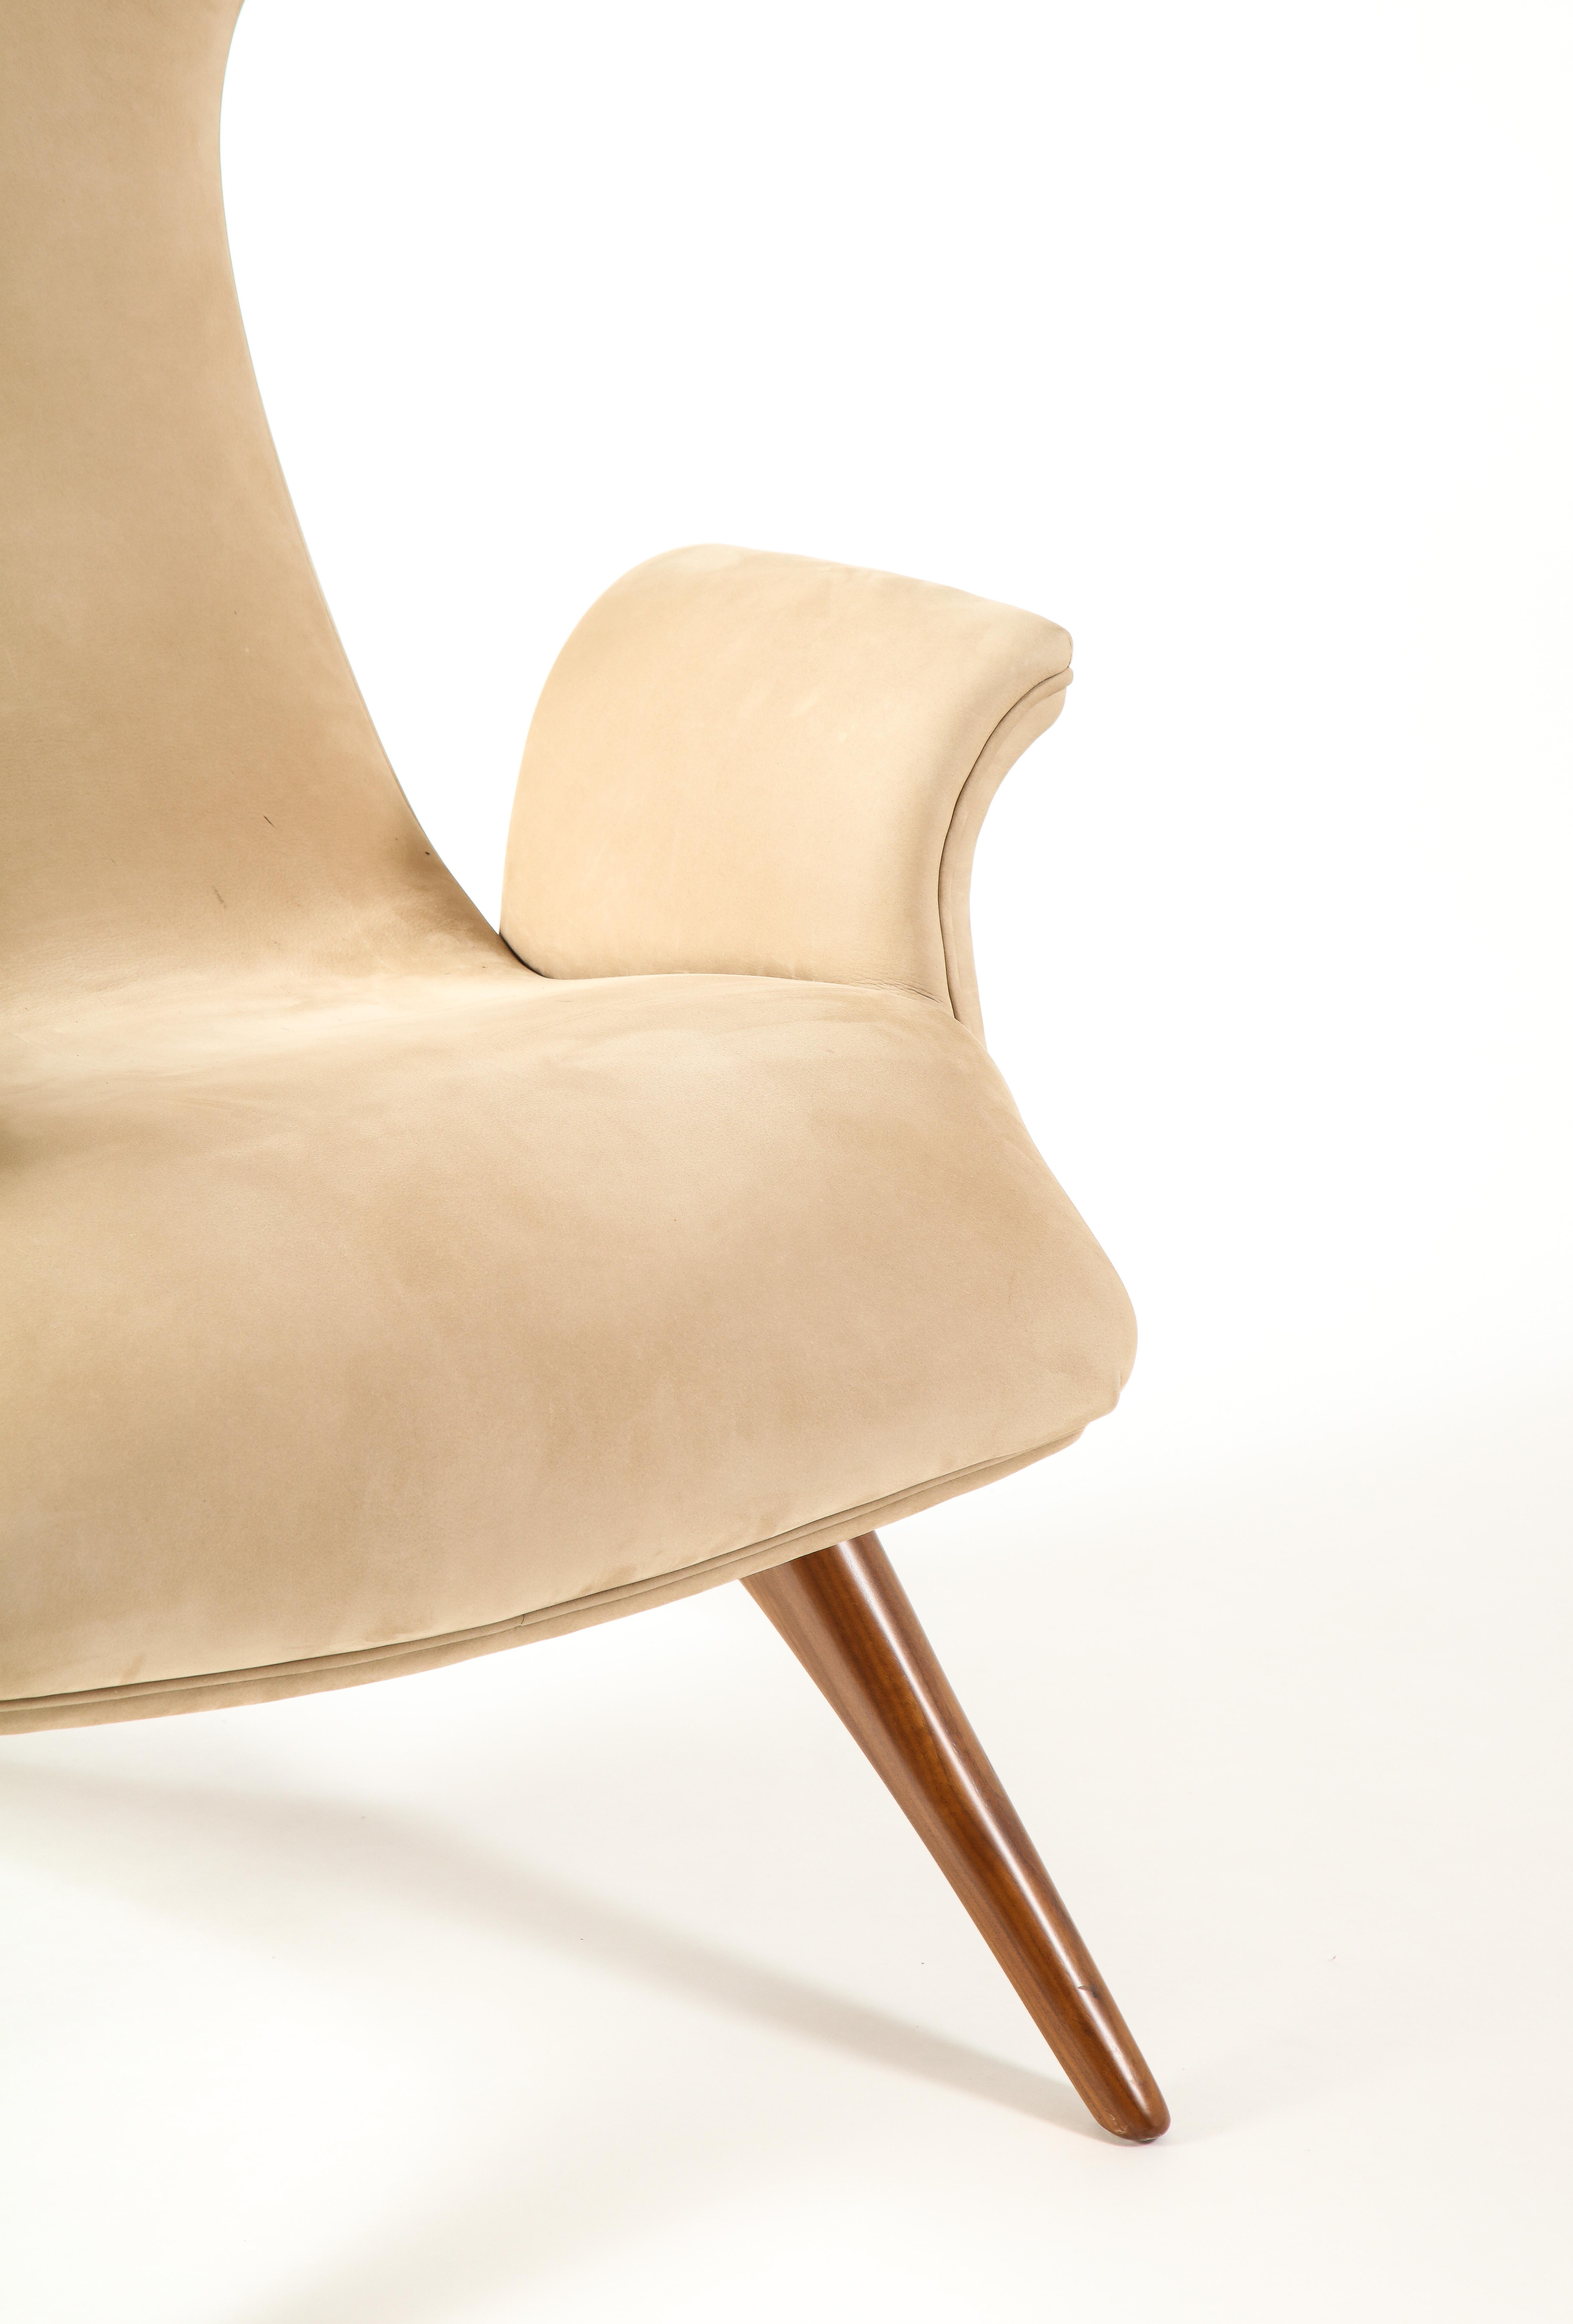 Vladimir Kagan Ondine Chair with Sueded Leather Upholstery & Natural Walnut Base 12